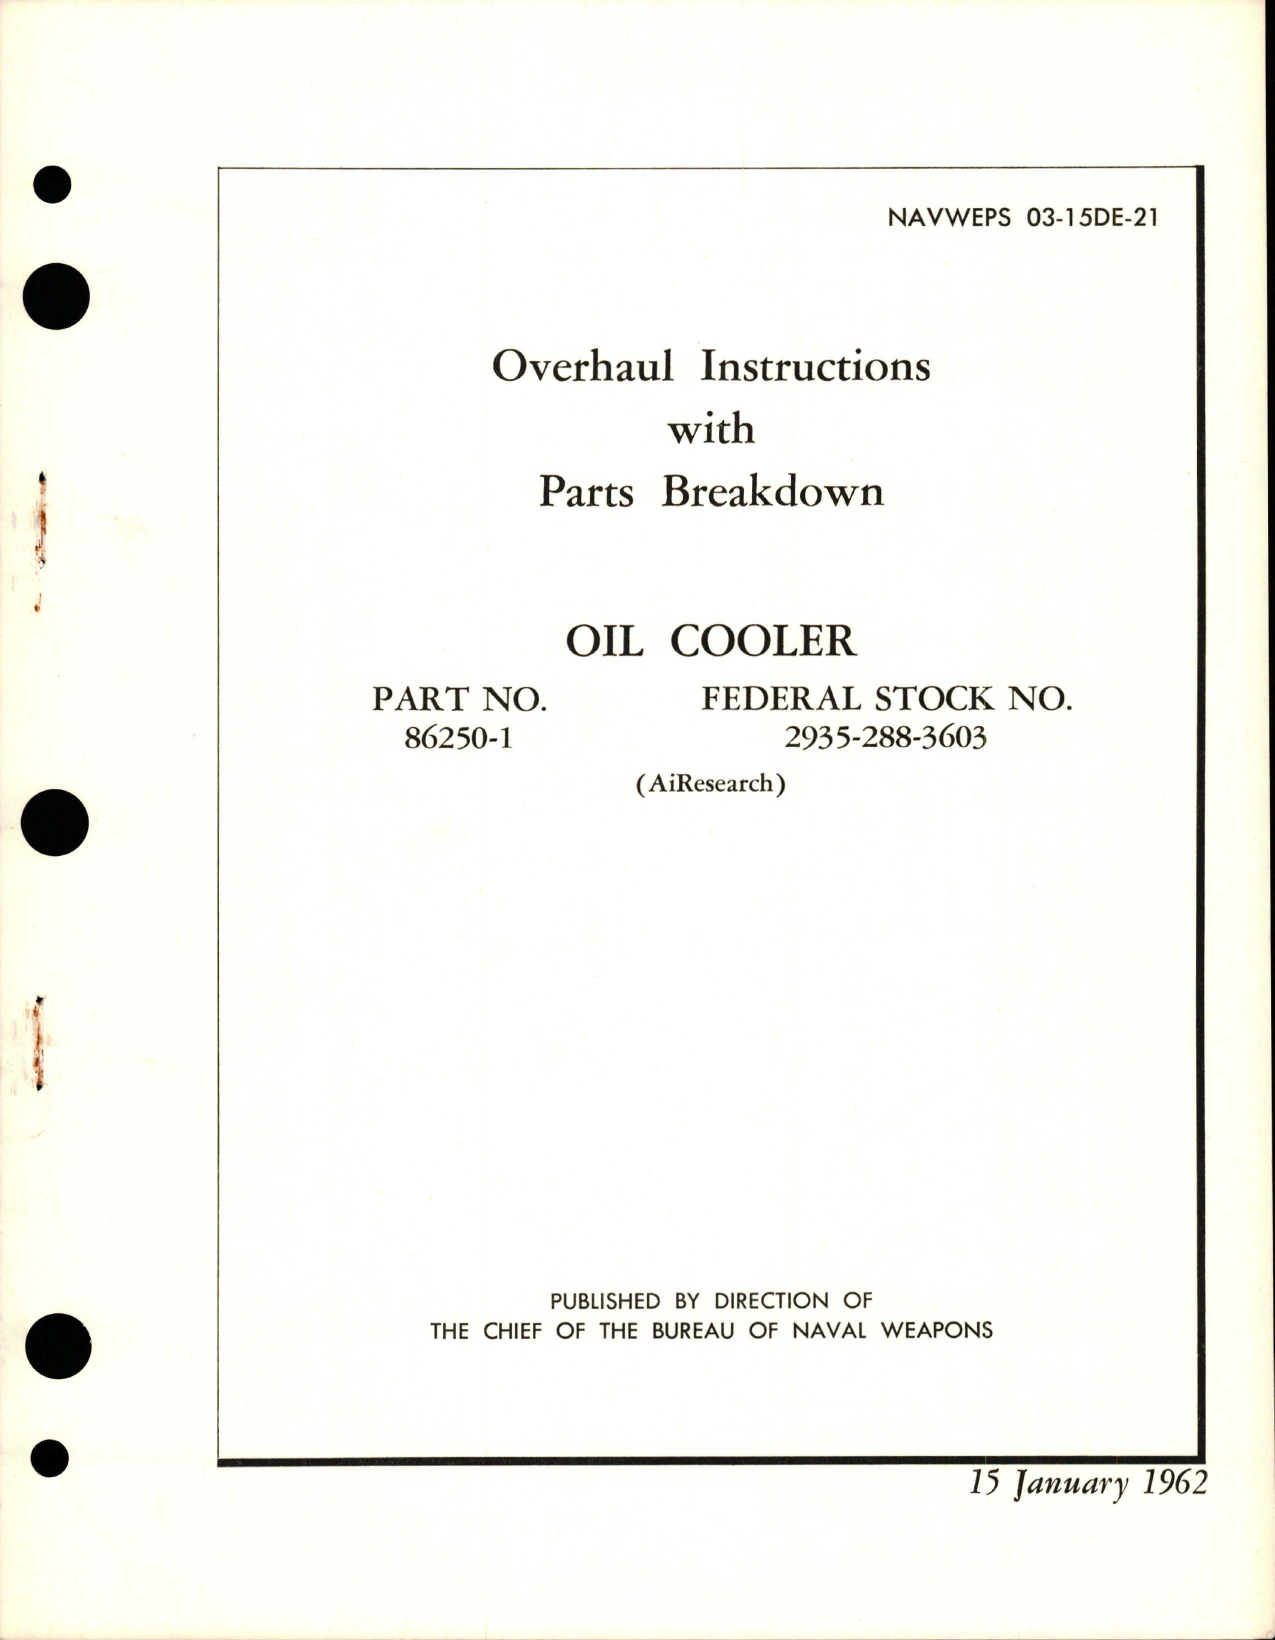 Sample page 1 from AirCorps Library document: Overhaul Instructions with Parts Breakdown for Oil Cooler - Part 86250-1